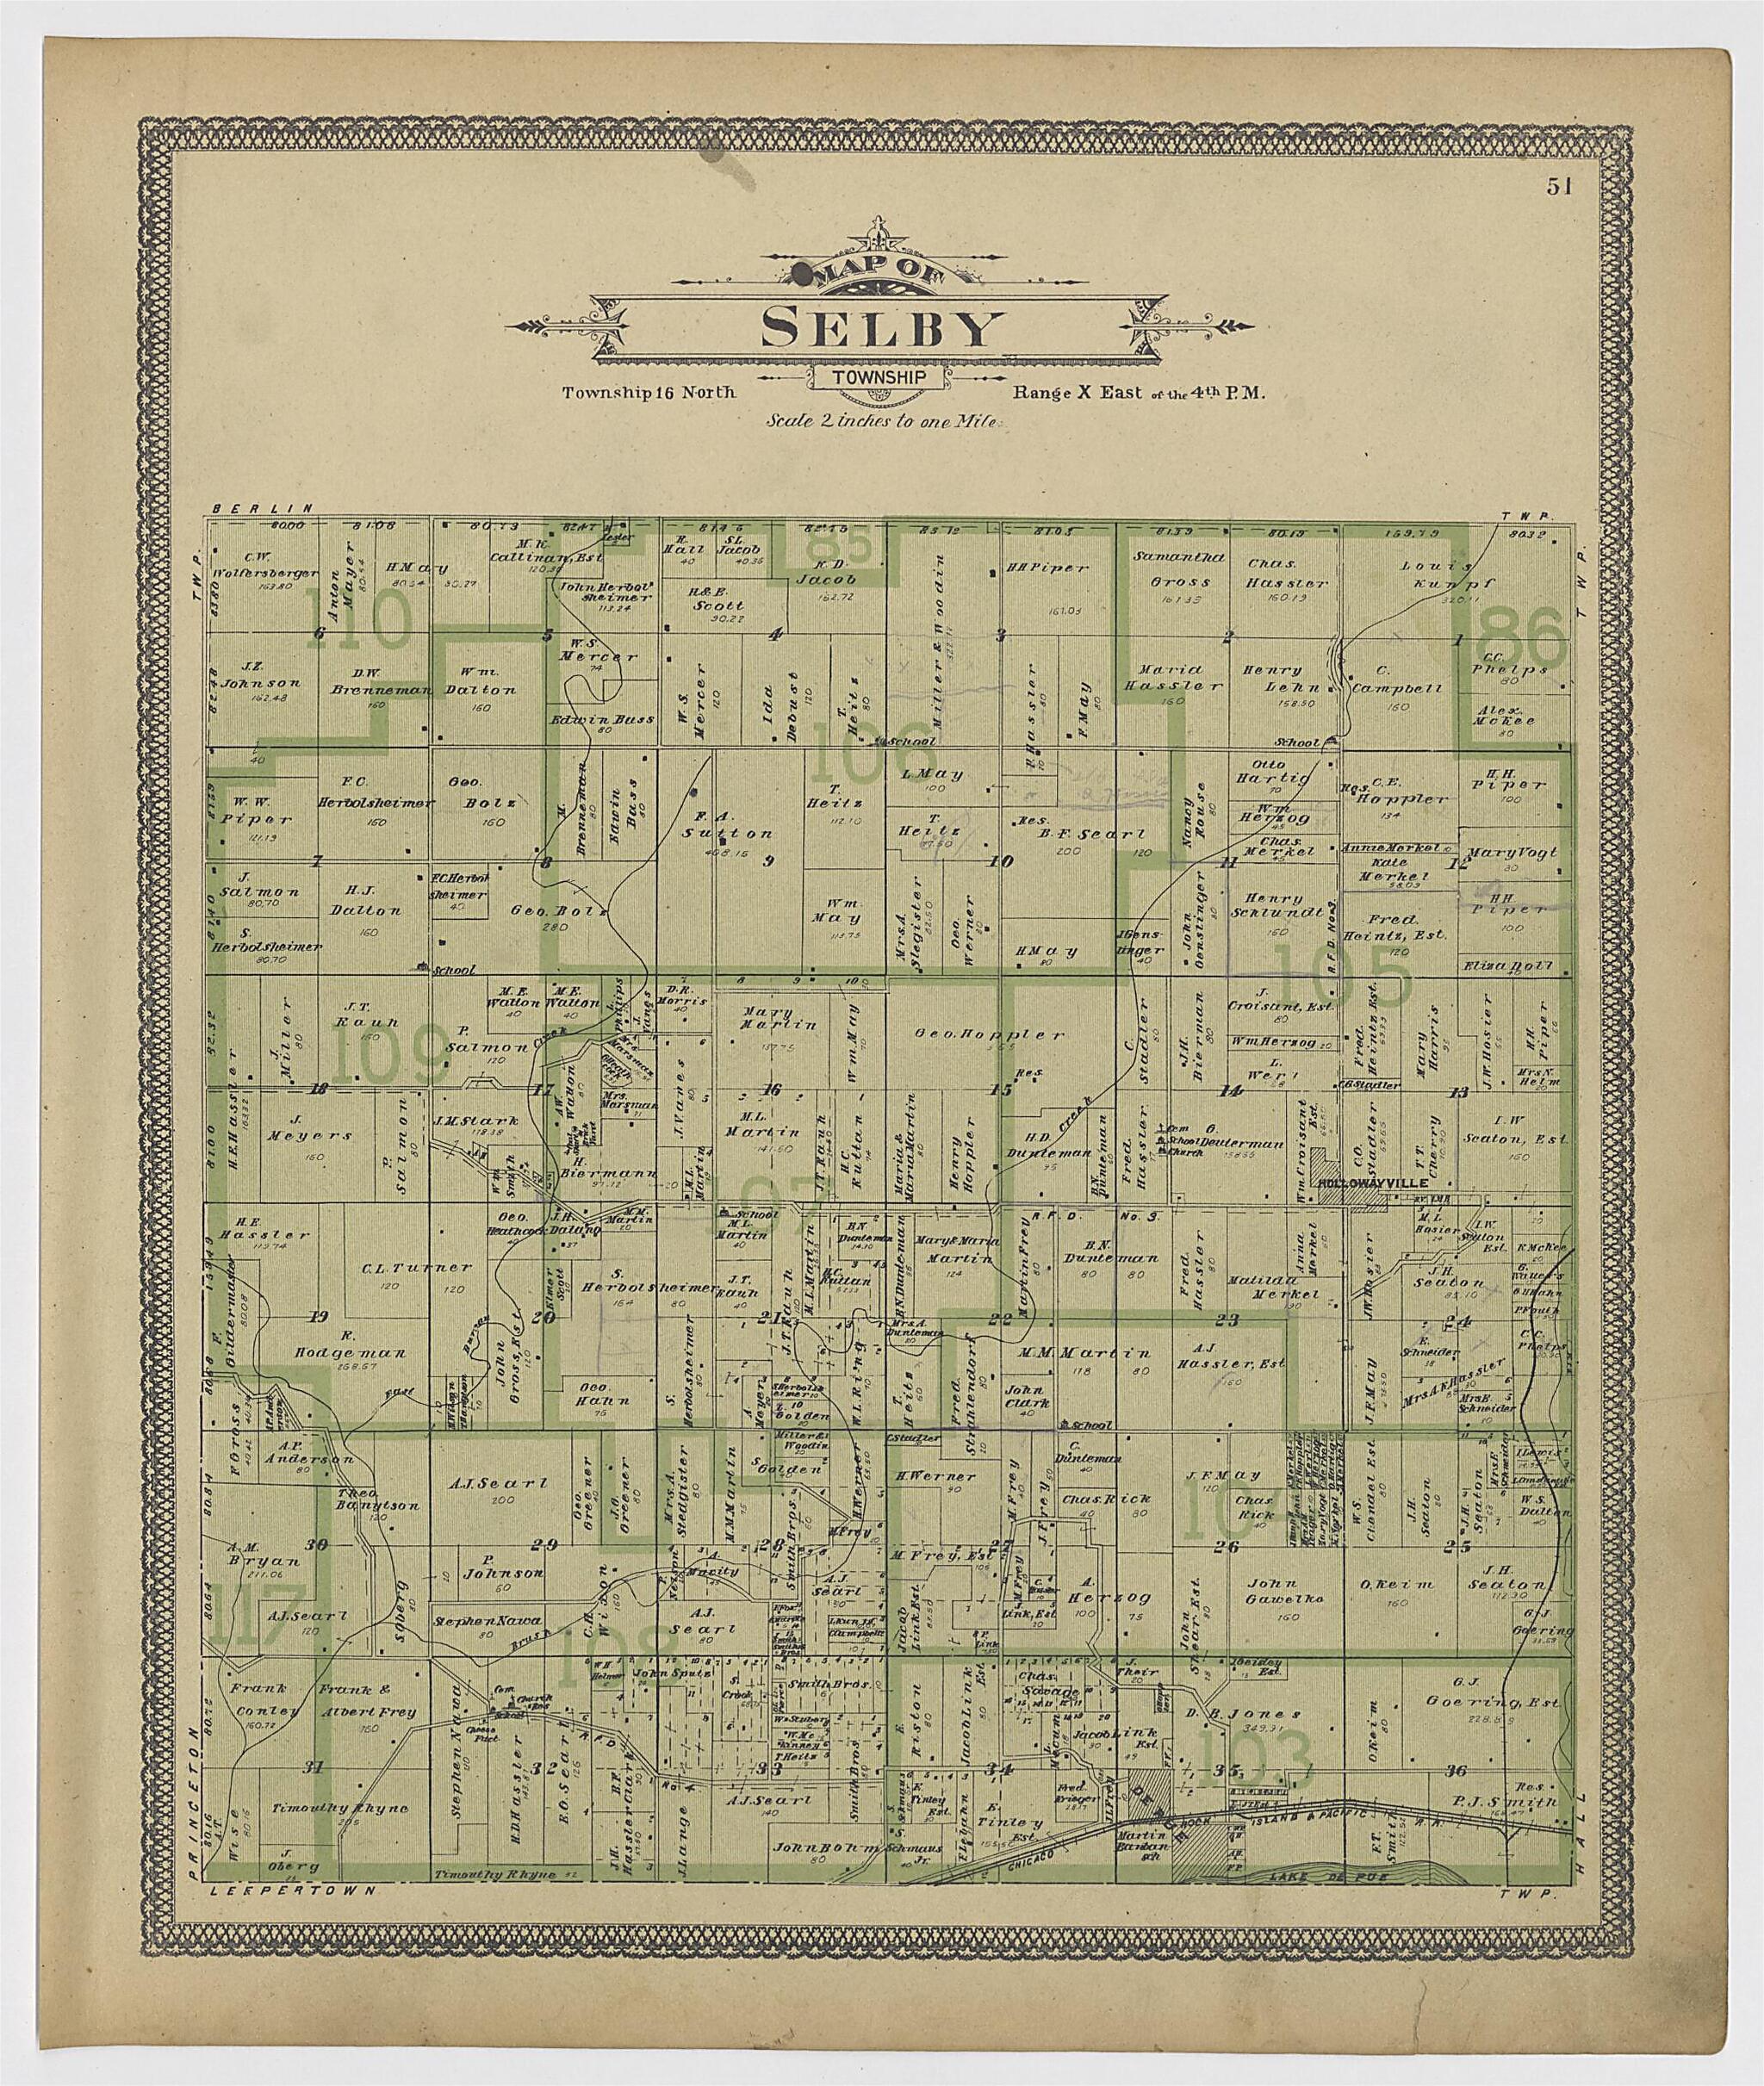 This old map of Image 29 of 20th Century Atlas of Bureau County, Illinois from Atlas of Bureau County, Illinois from 1905 was created by  Middle-West Publishing Co in 1905